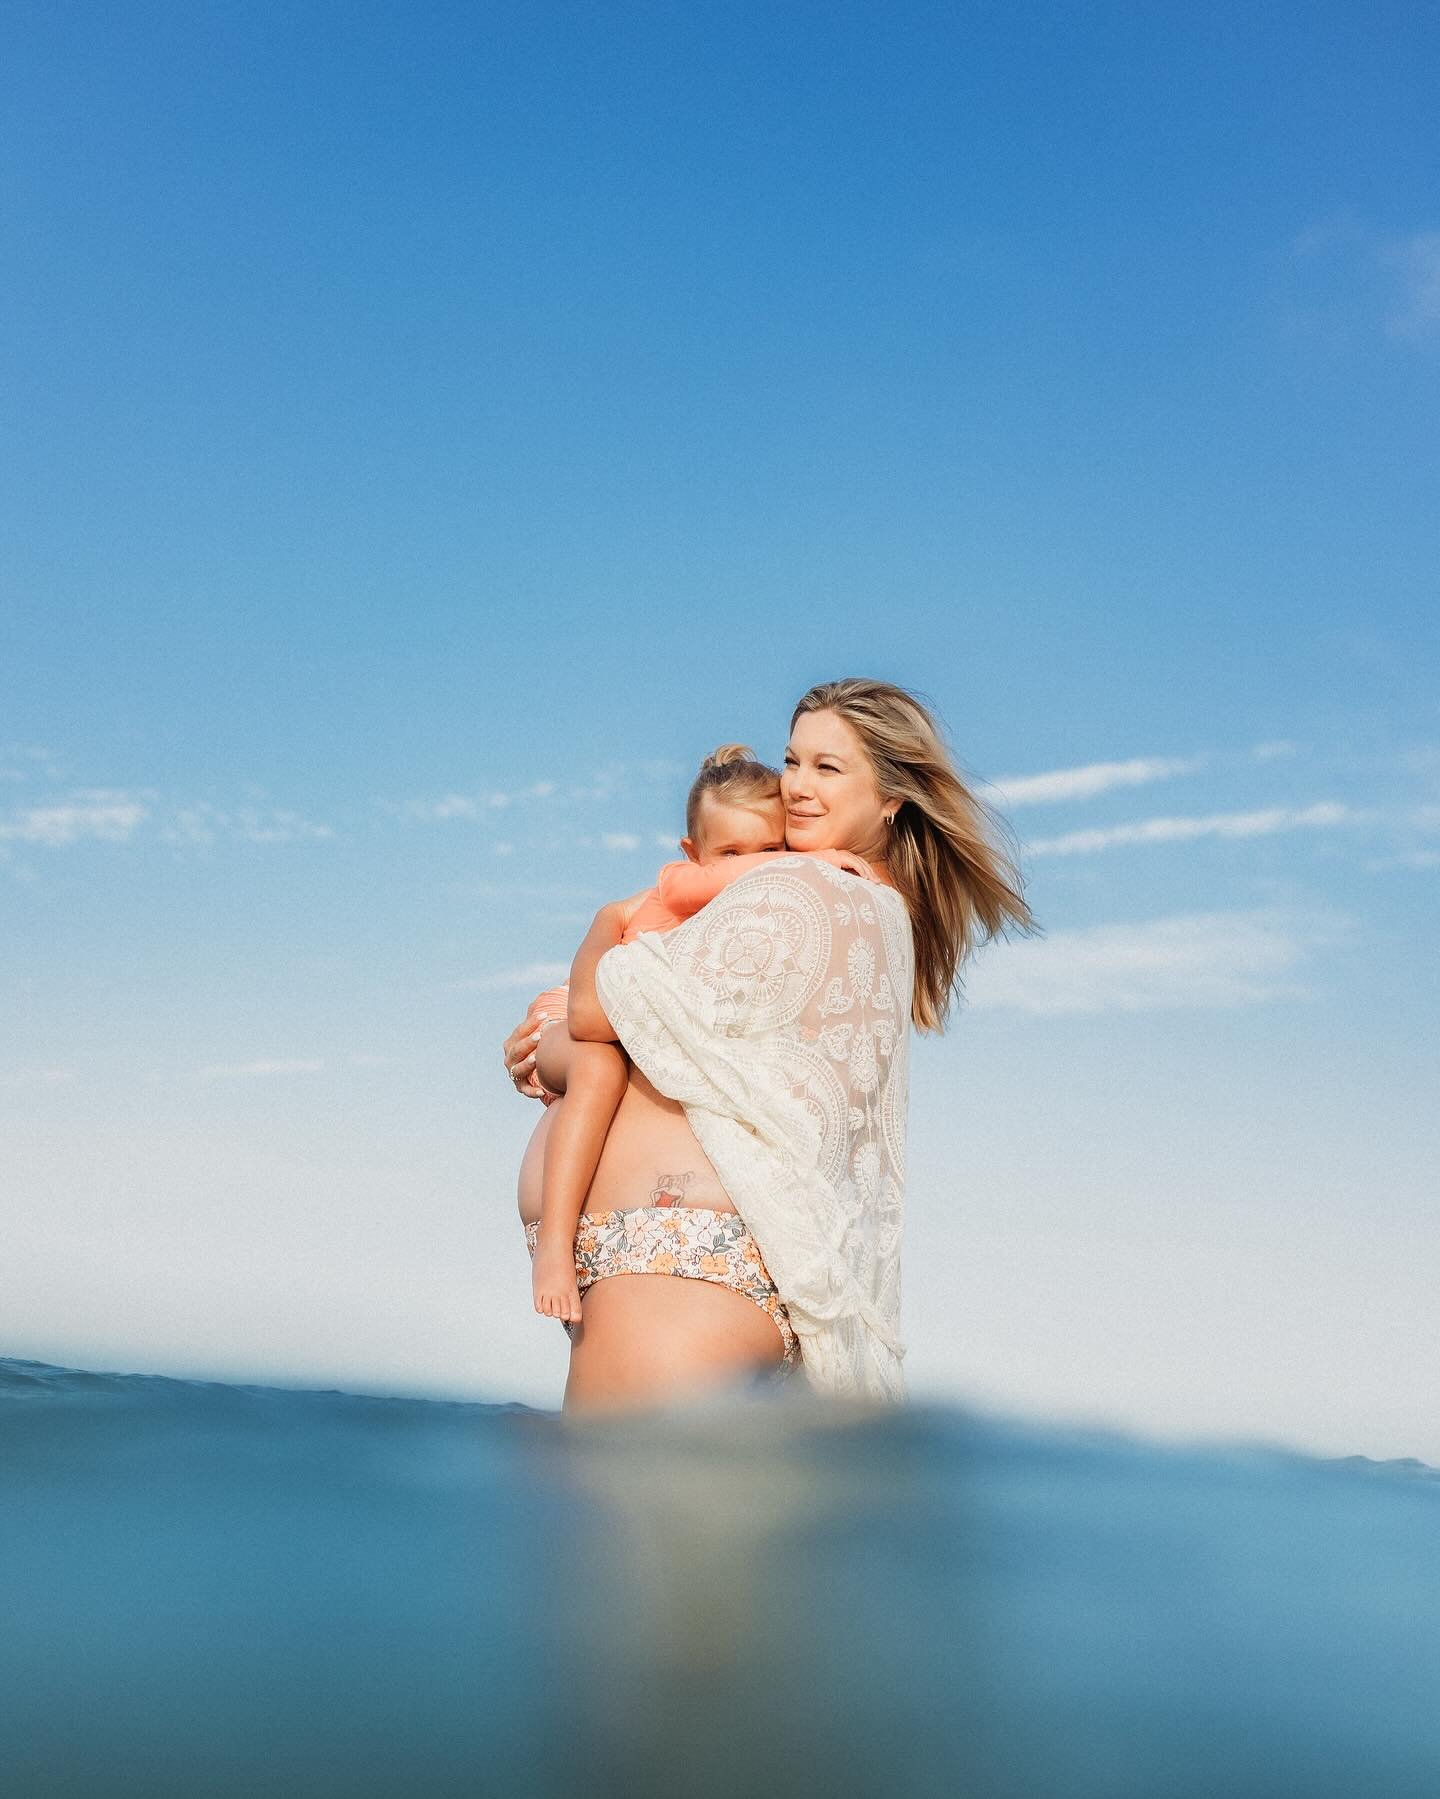 As mother and her daughter held one another amidst the gentle ease of the ocean&rsquo;s embrace. With each splash and giggle, they seemed to embody the ethereal grace of mermaids, their laughter mingling with the whispers of the sea. In this enchanti